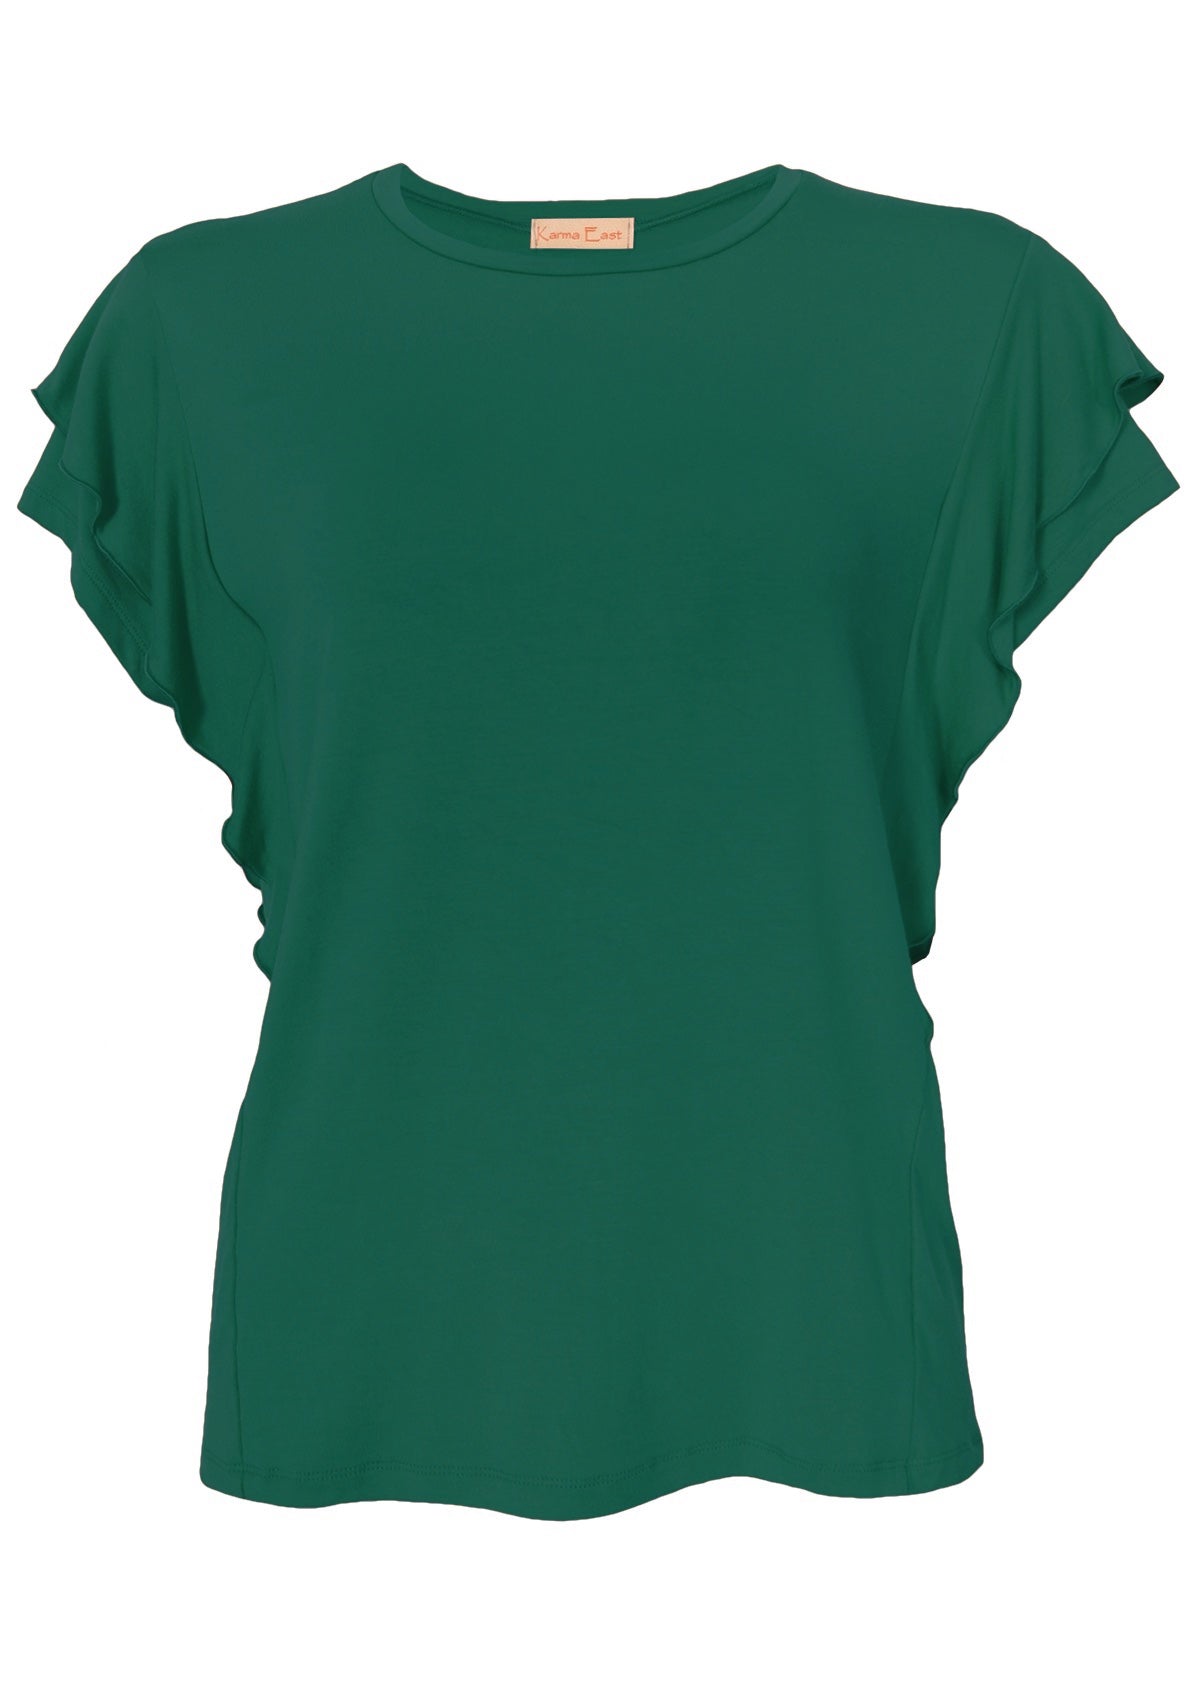 Front view of a ruffle green round neck short cap sleeve rayon top.